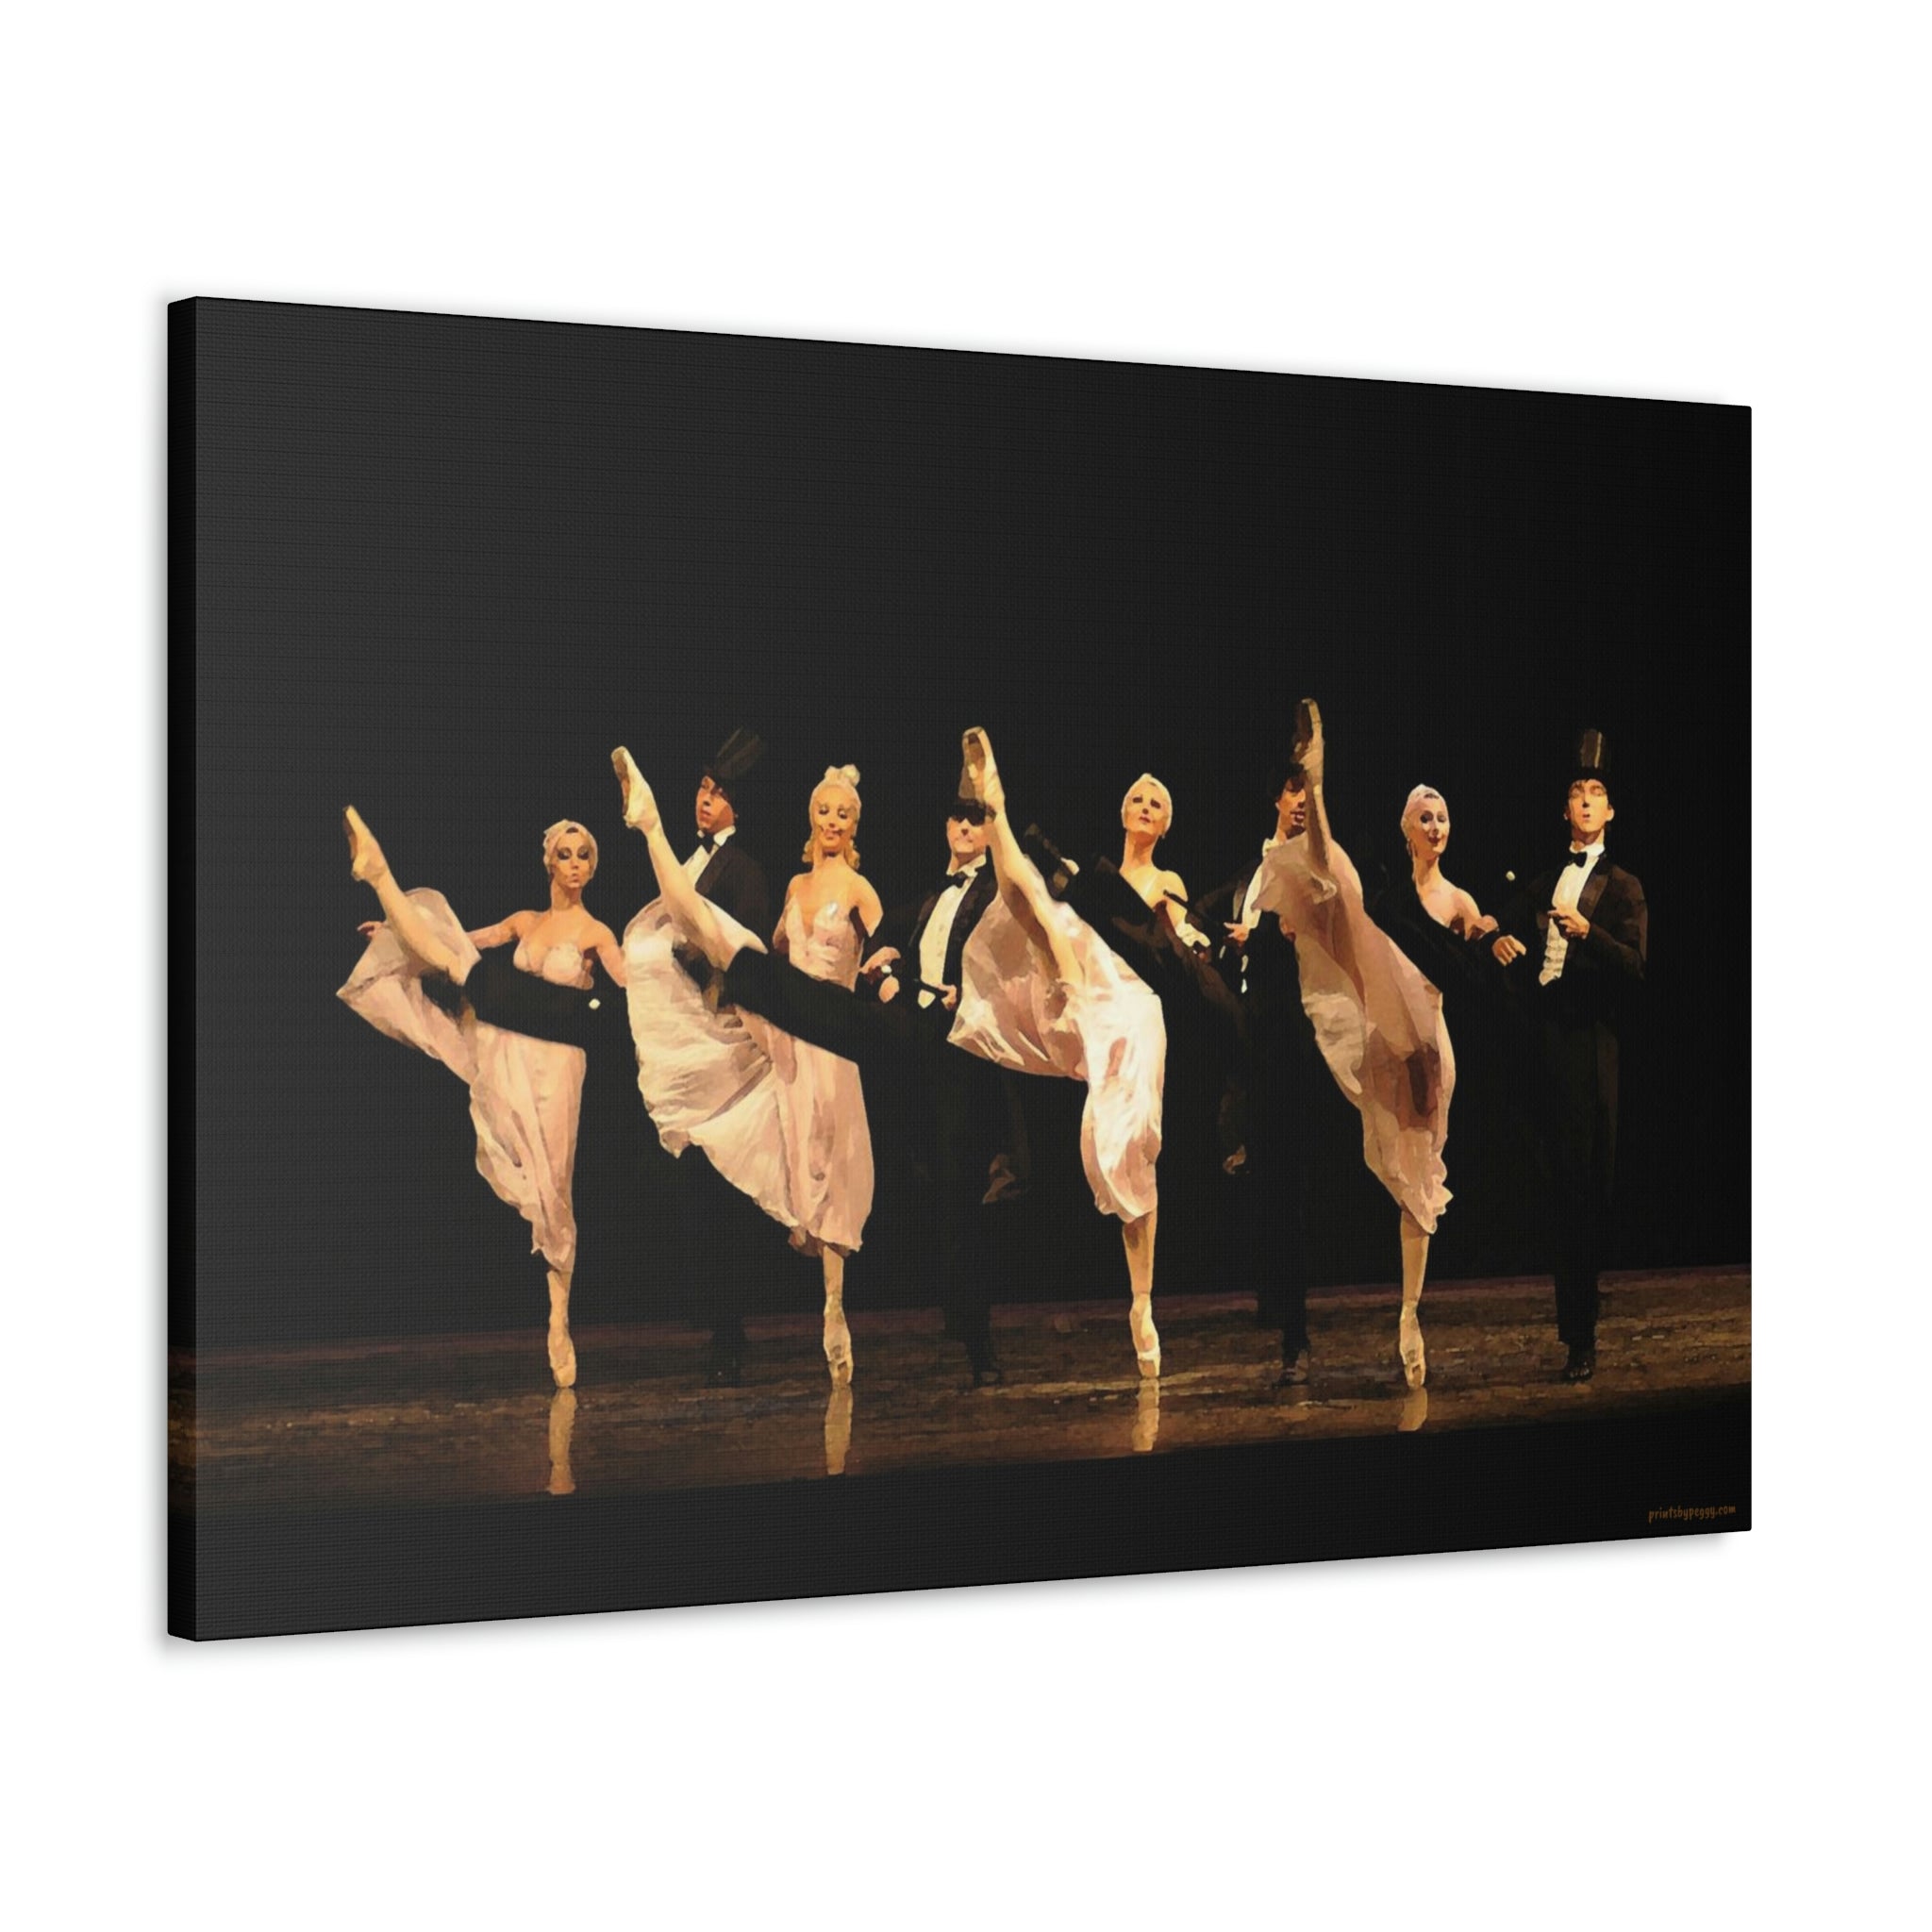 An oil canvas print of a kick line comprised of 8 male and female dancers. Females are in white and the males are in tuxedos with top hats